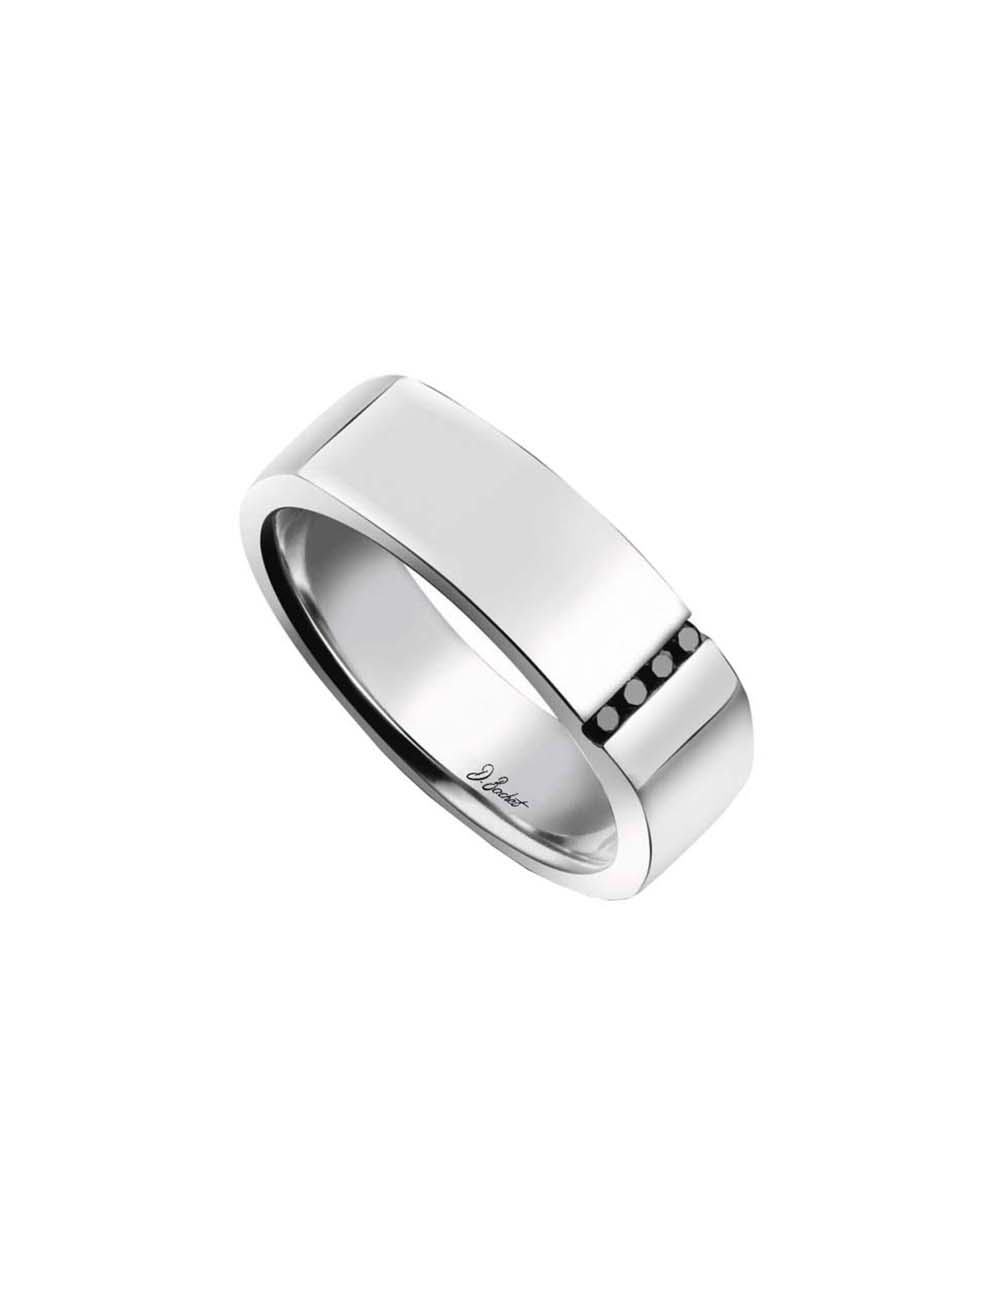 Spirit: Men's platinum signet ring with black diamonds, crafted with French expertise.